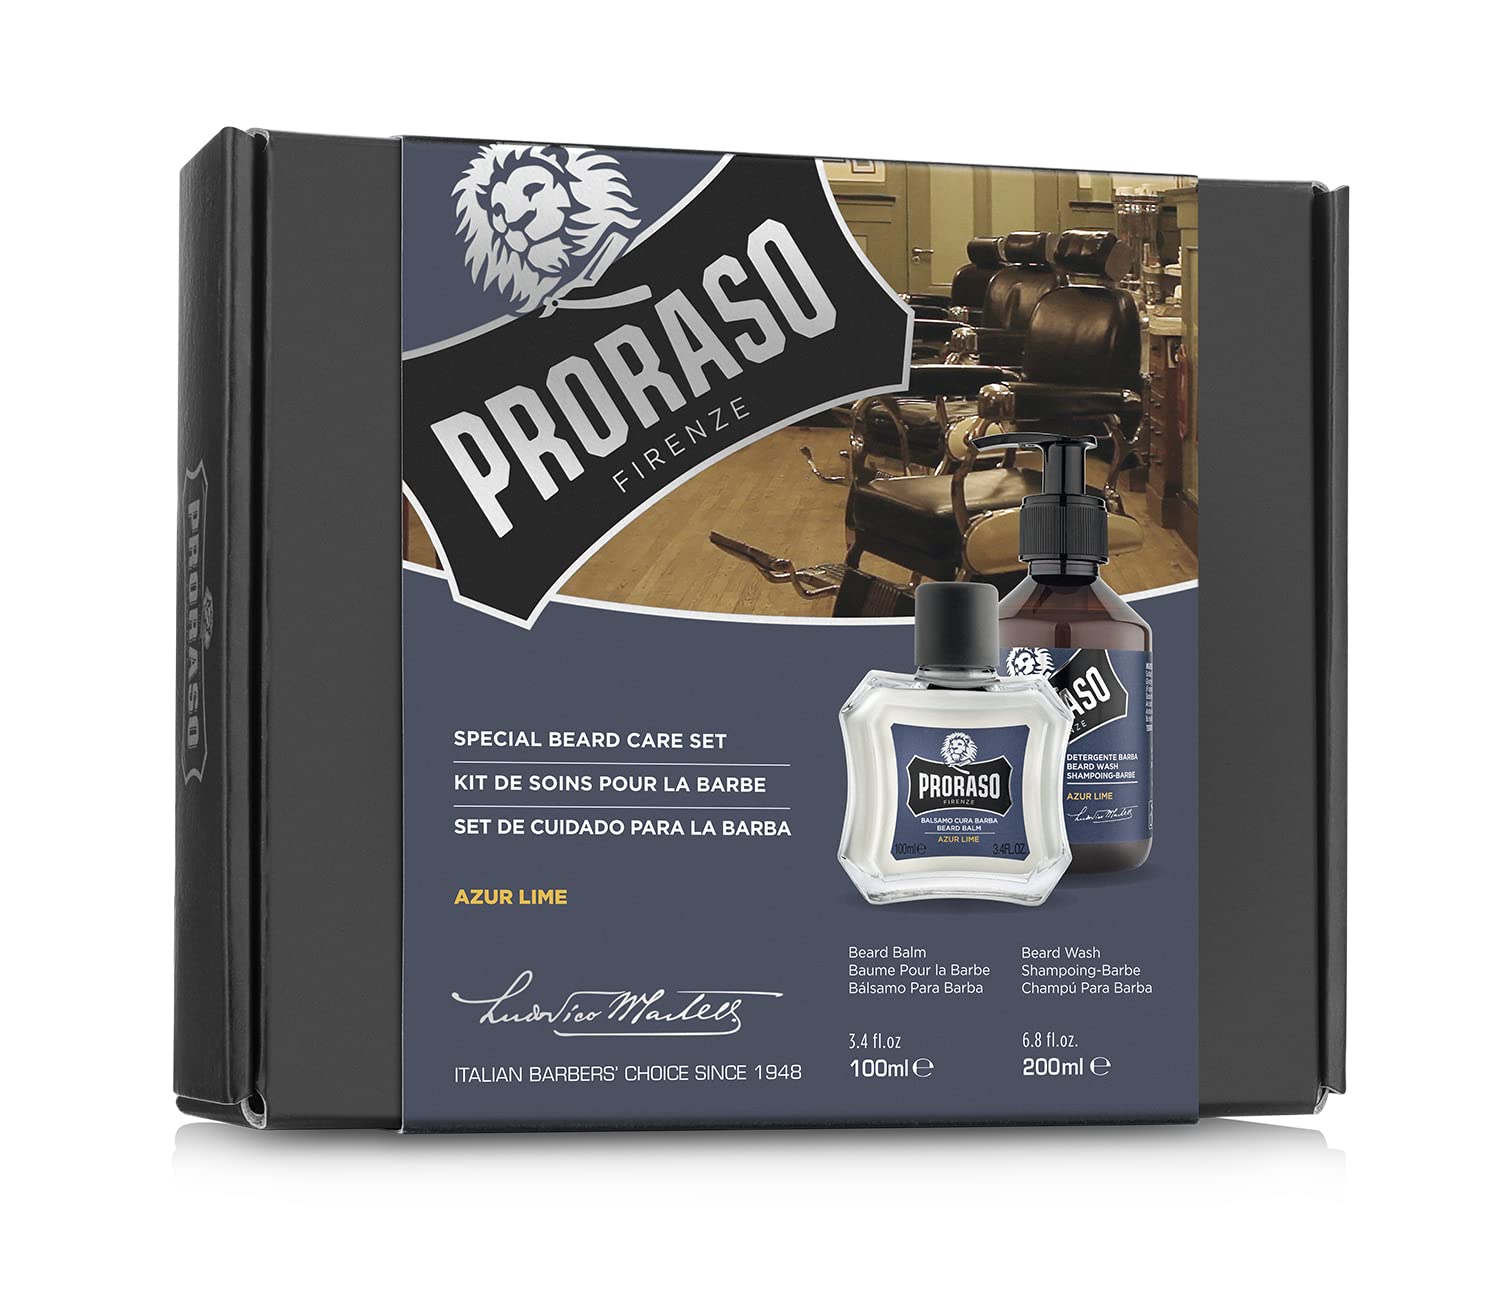 Proraso Beard Care Kit for Men | Beard Wash & Beard Balm to Cleanse, Soften and Reduce Itch for New or Short Beards | Azur Lime : Everything Else